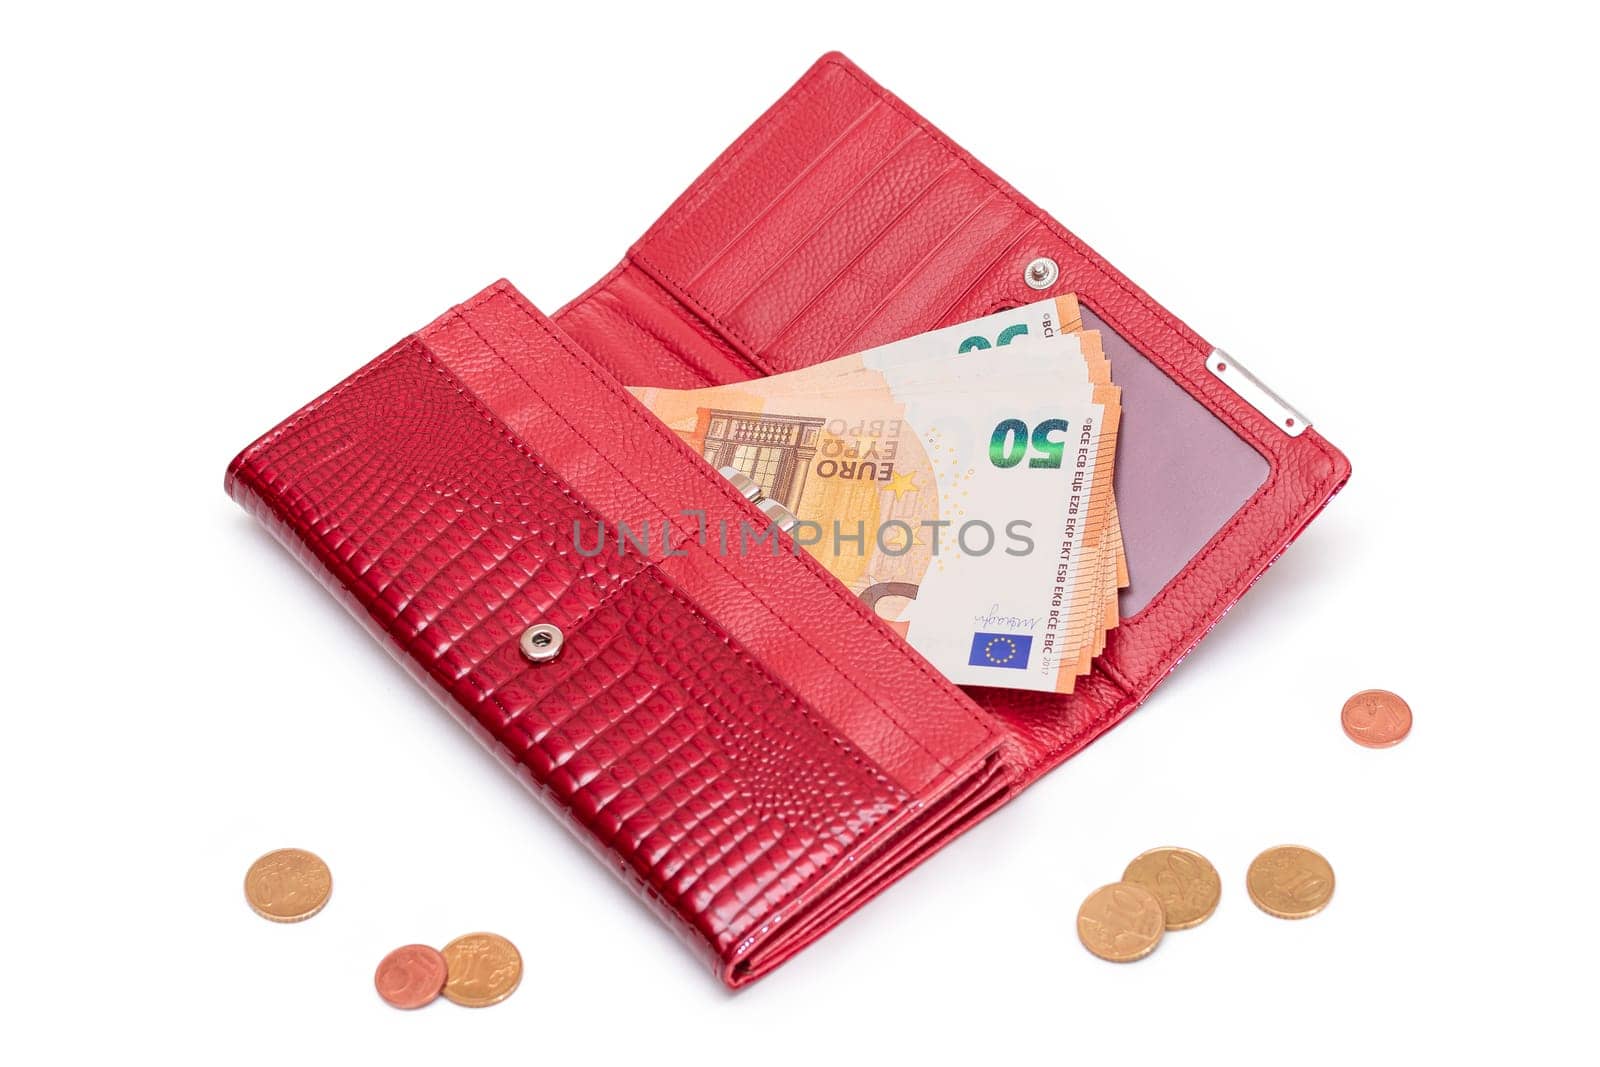 Opened Red Women Purse with 50 Euro Banknotes Inside and Scattered Euro Cent Coins - Isolated on White Background. A Wallet Full of Money Symbolizing Wealth, Success, Shopping and Social Status - Isolation